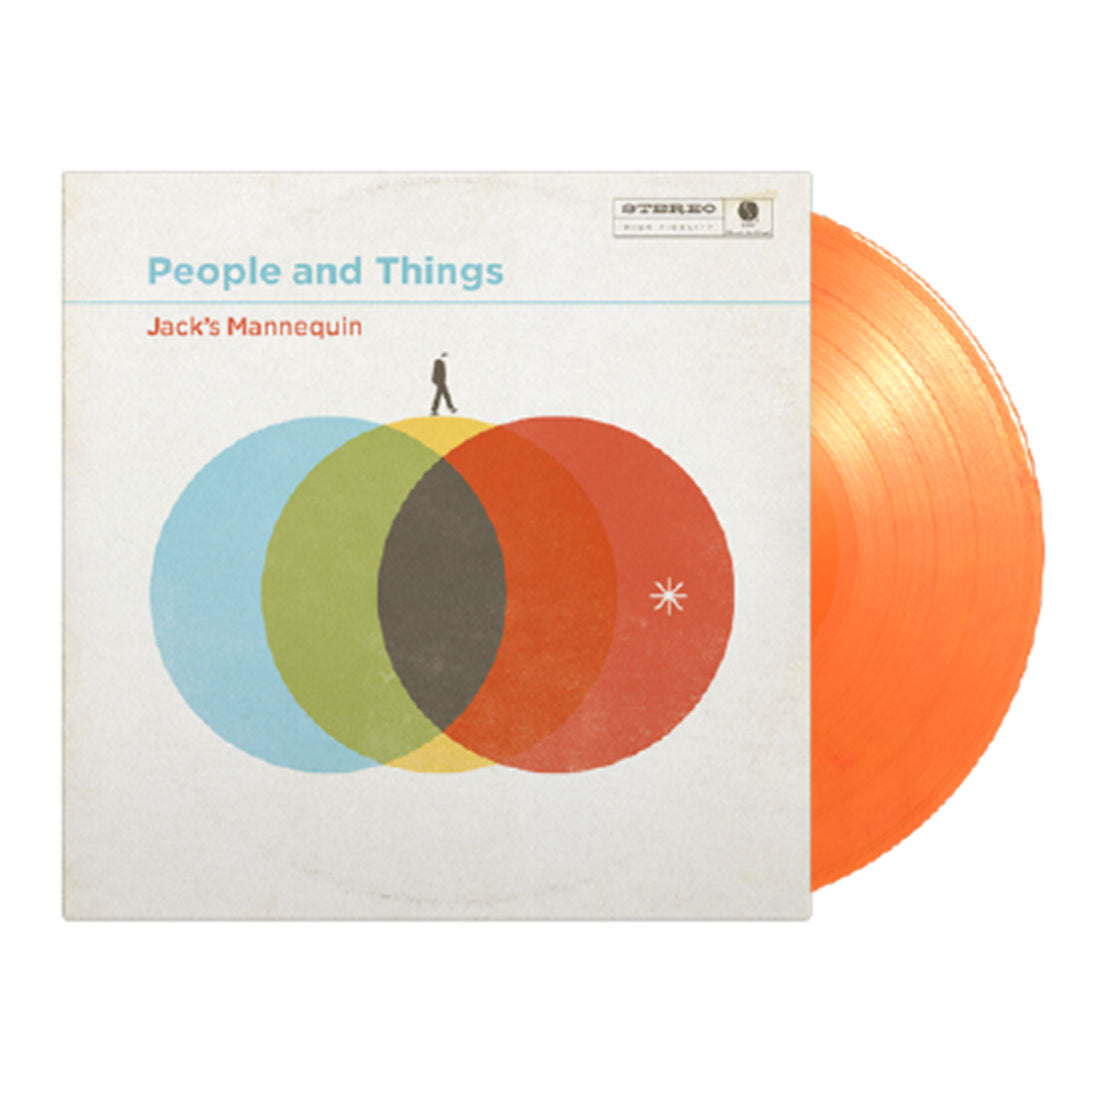 Jack's Mannequin - People and Things: Limited Edition Orange Vinyl